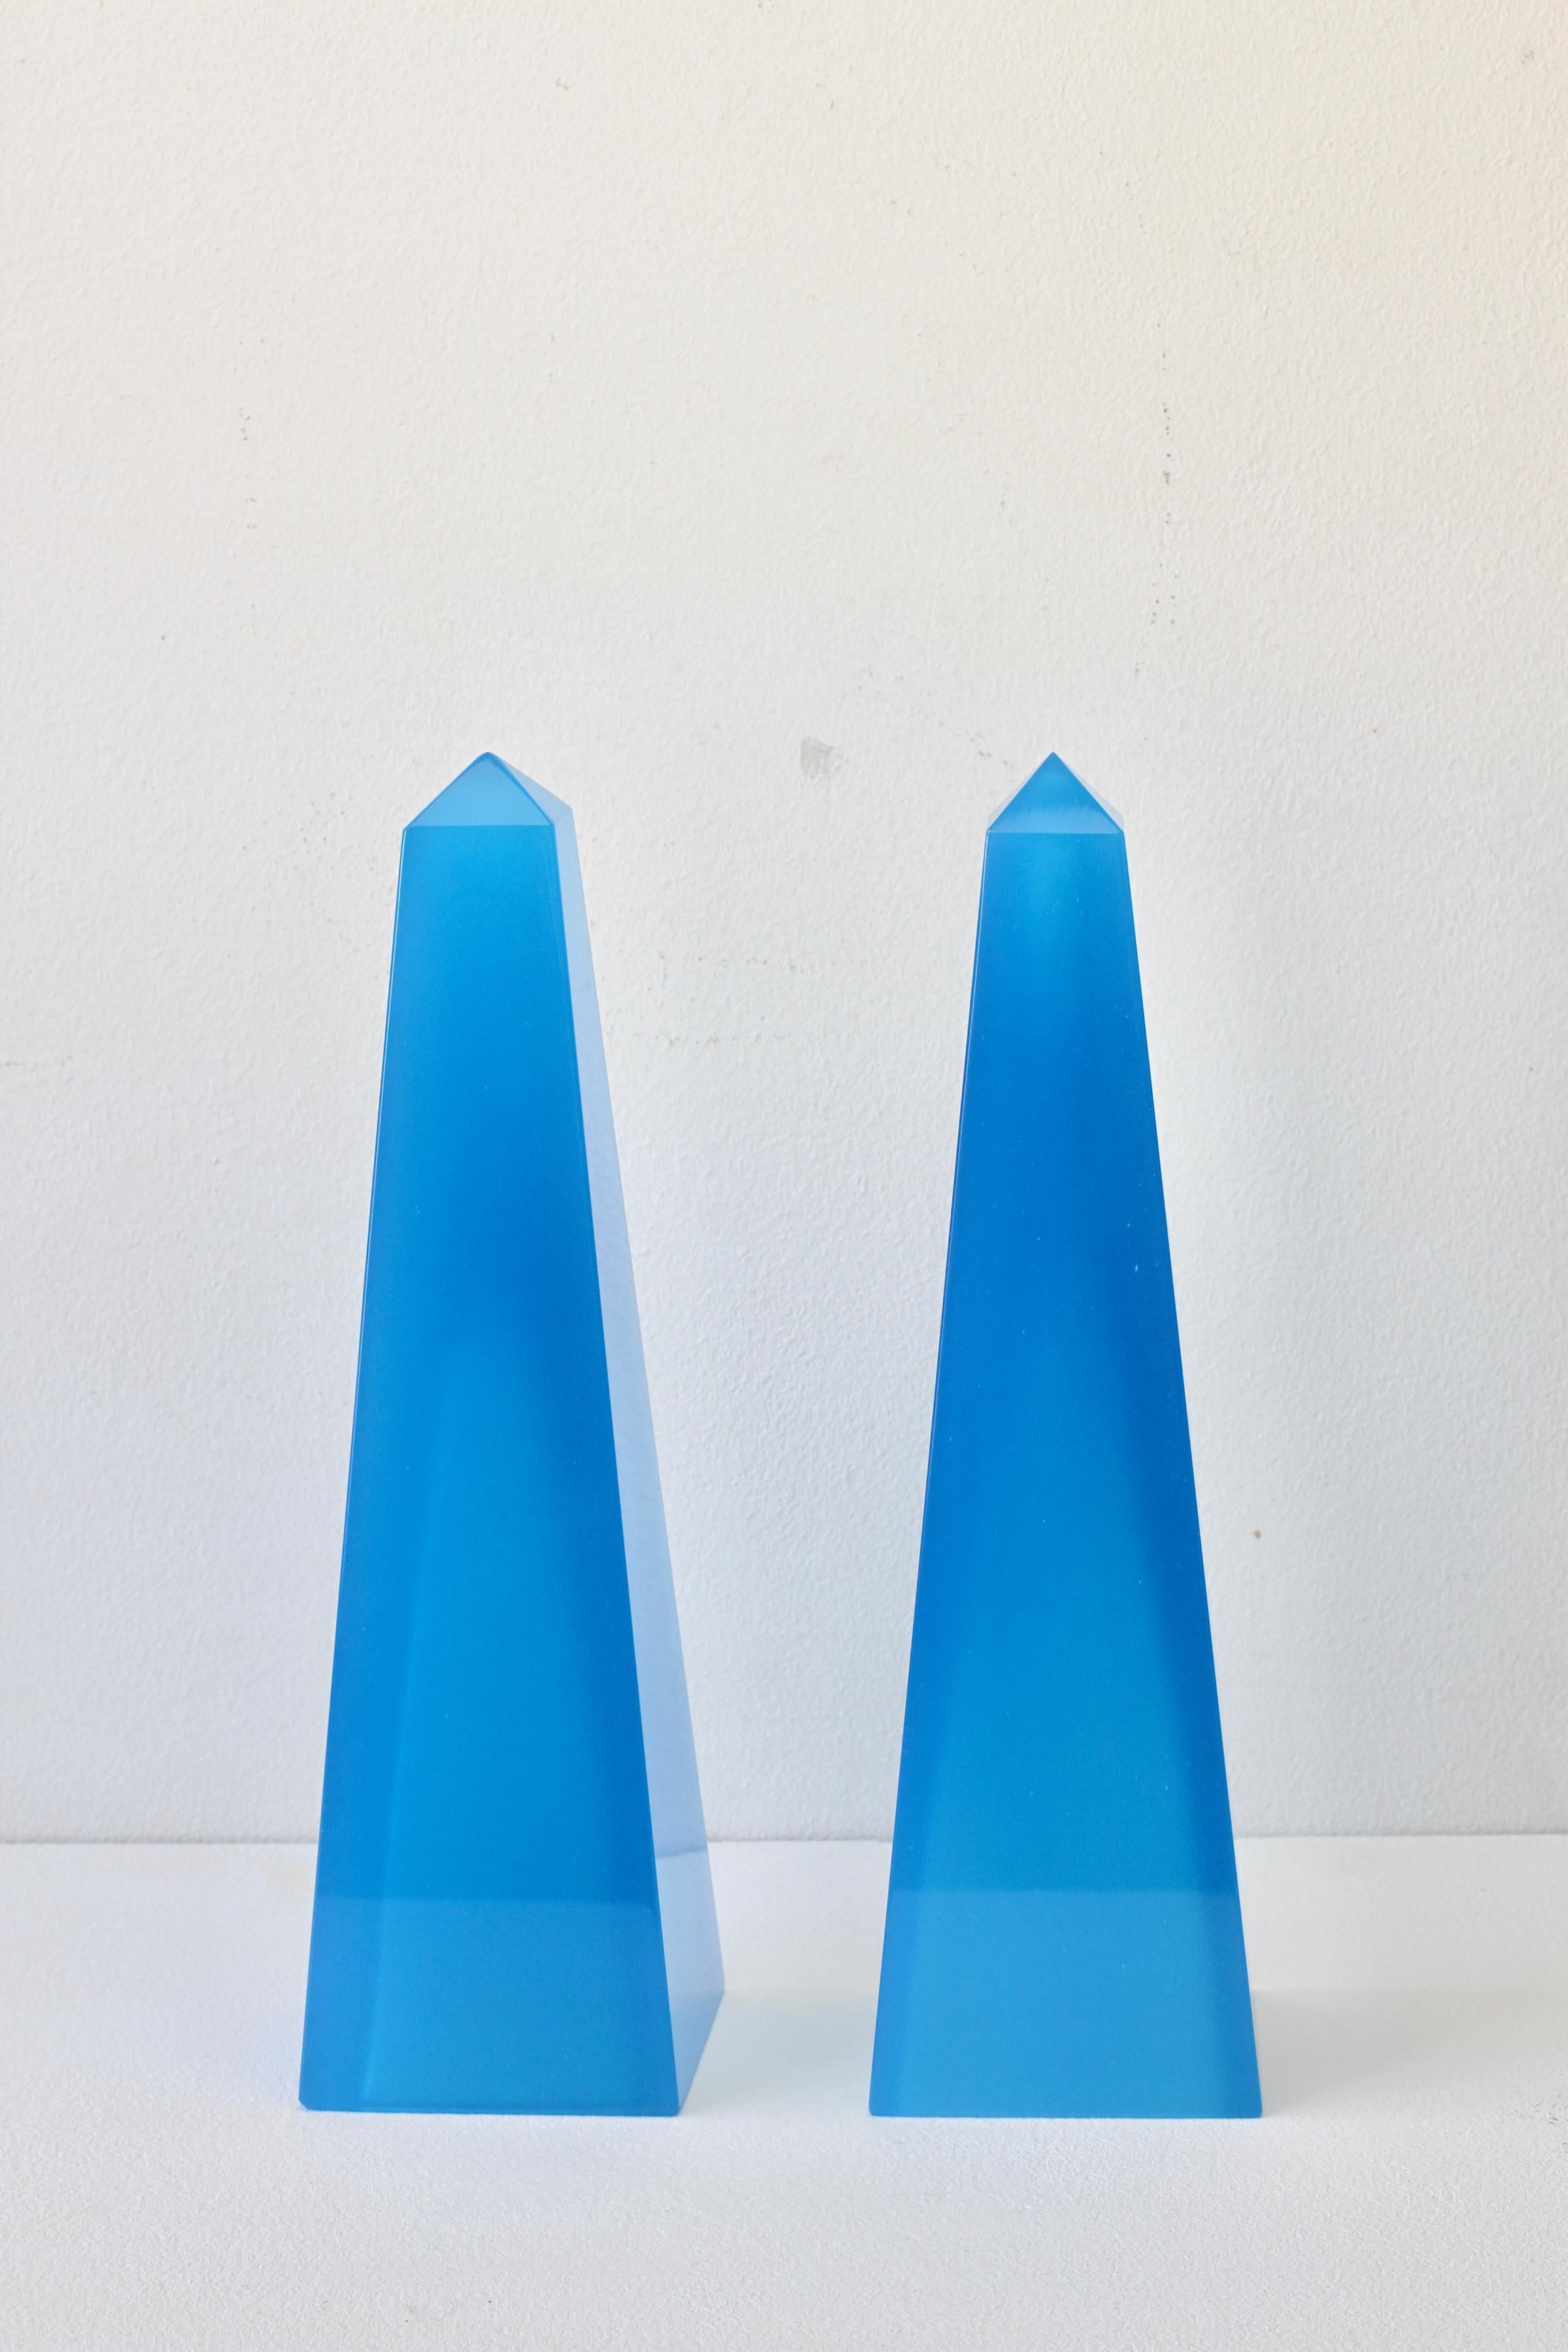 Cenedese vintage midcentury modern tall and rare pair of 'new old stock' Murano solid light blue colored / coloured faceted glass obelisks, made circa 1970. Wonderful Italian glass and perfect as interesting and decorative paperweights or desk